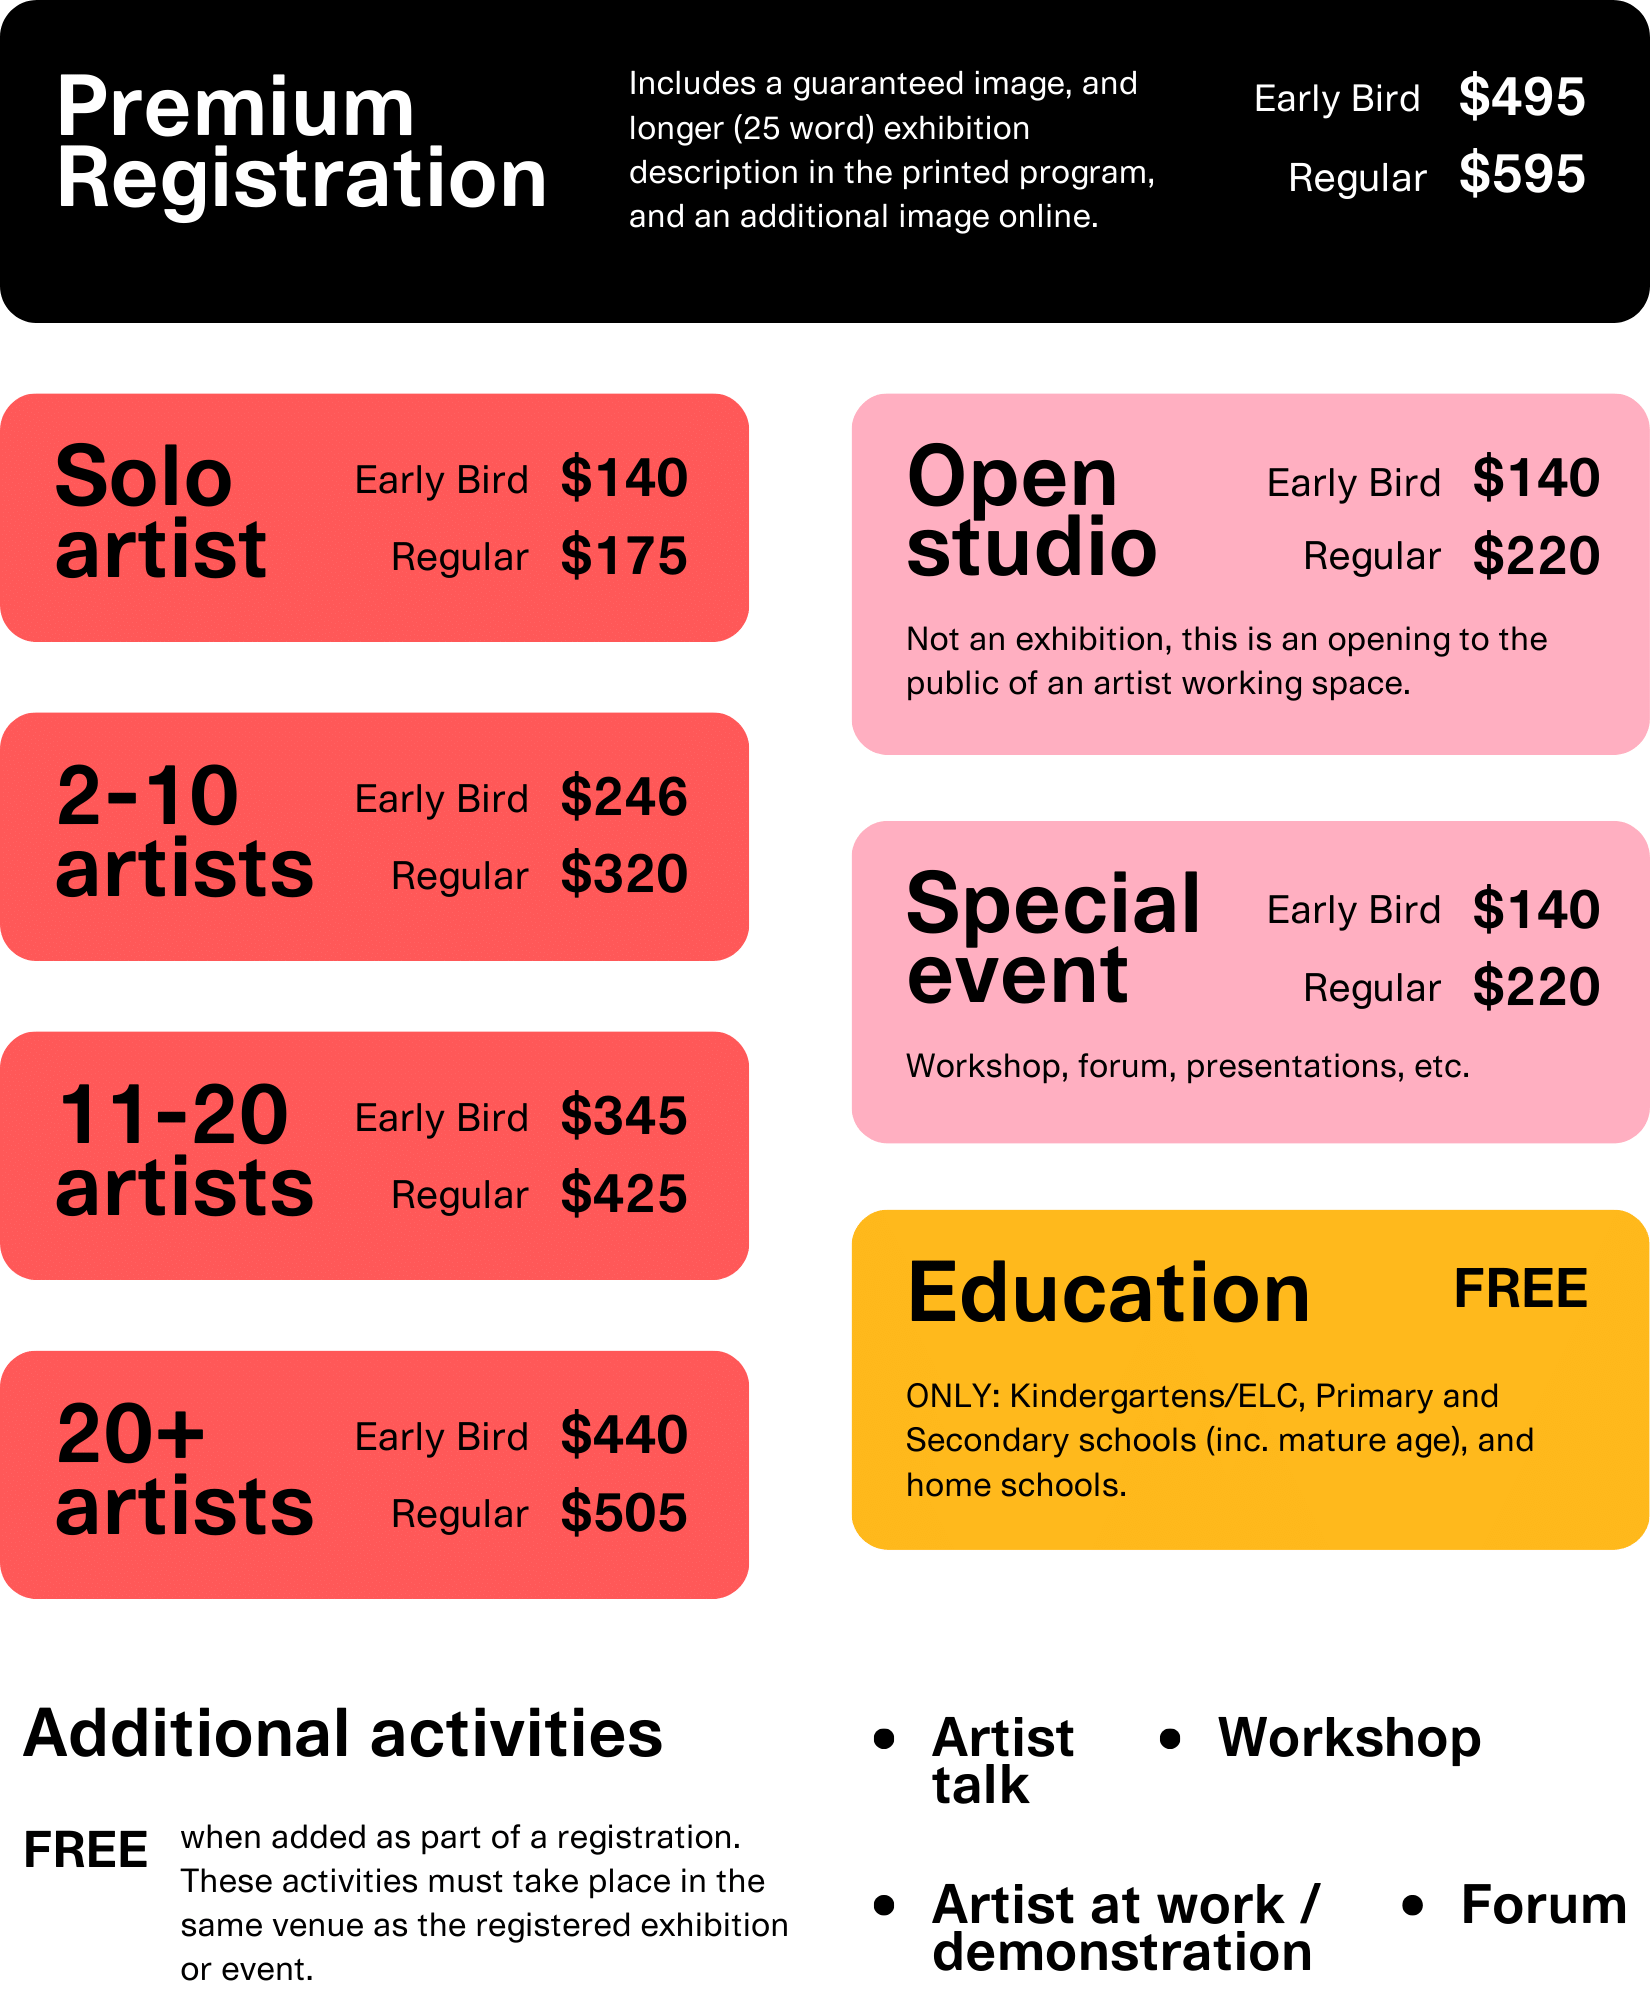 2024 SALA Registrations open 1 March - 8 May. Early Bird pricing available 1 March – 8 April, midnight. ____________________ Please note: Early Bird Pricing is from 1 Mar- 8 Apr. Regular Fee is from 8 April - 8 May. Solo artist fee: $140 Early Bird $175 Regular 2-10 artists fee: $246 Early Bird $320 Regular 11-20 artists fee: $345 Early Bird $425 Regular 20+ artists fee: $440 Early Bird $505 Regular Open studio fee (not an exhibition, just opening the studio to the public) : $140 Early Bird $220 Regular Education fee: Free Special event fee (workshop, forum, presentation etc): $140 Early Bird $220 Regular Additional Activities: Artist Talks, Workshops, Forums, Artist at work / demonstration are all free when added to a registration. Upgrade: Premium Registration fee (includes guaranteed image and 25 word exhibition description in print program, and additional image in online program): $495 Early Bird $595 Regular